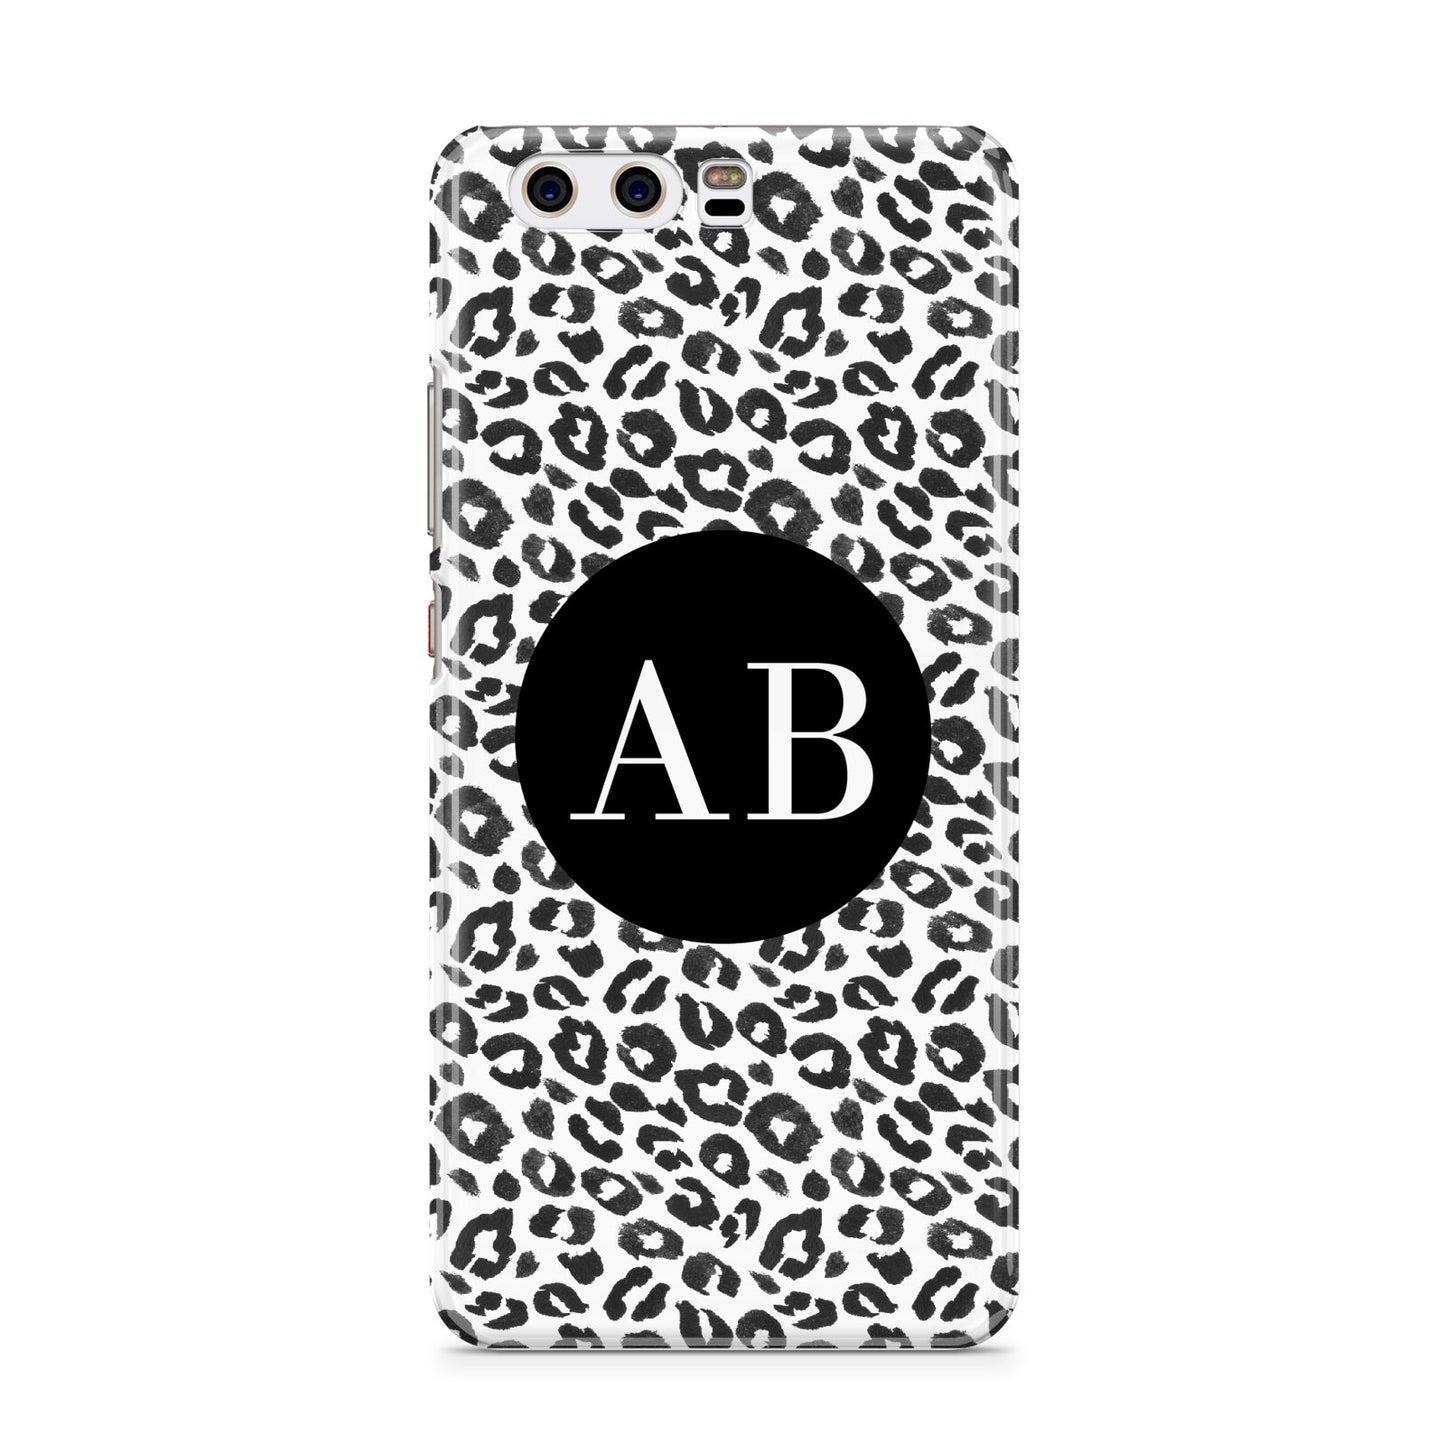 Leopard Print Black and White Huawei P10 Phone Case